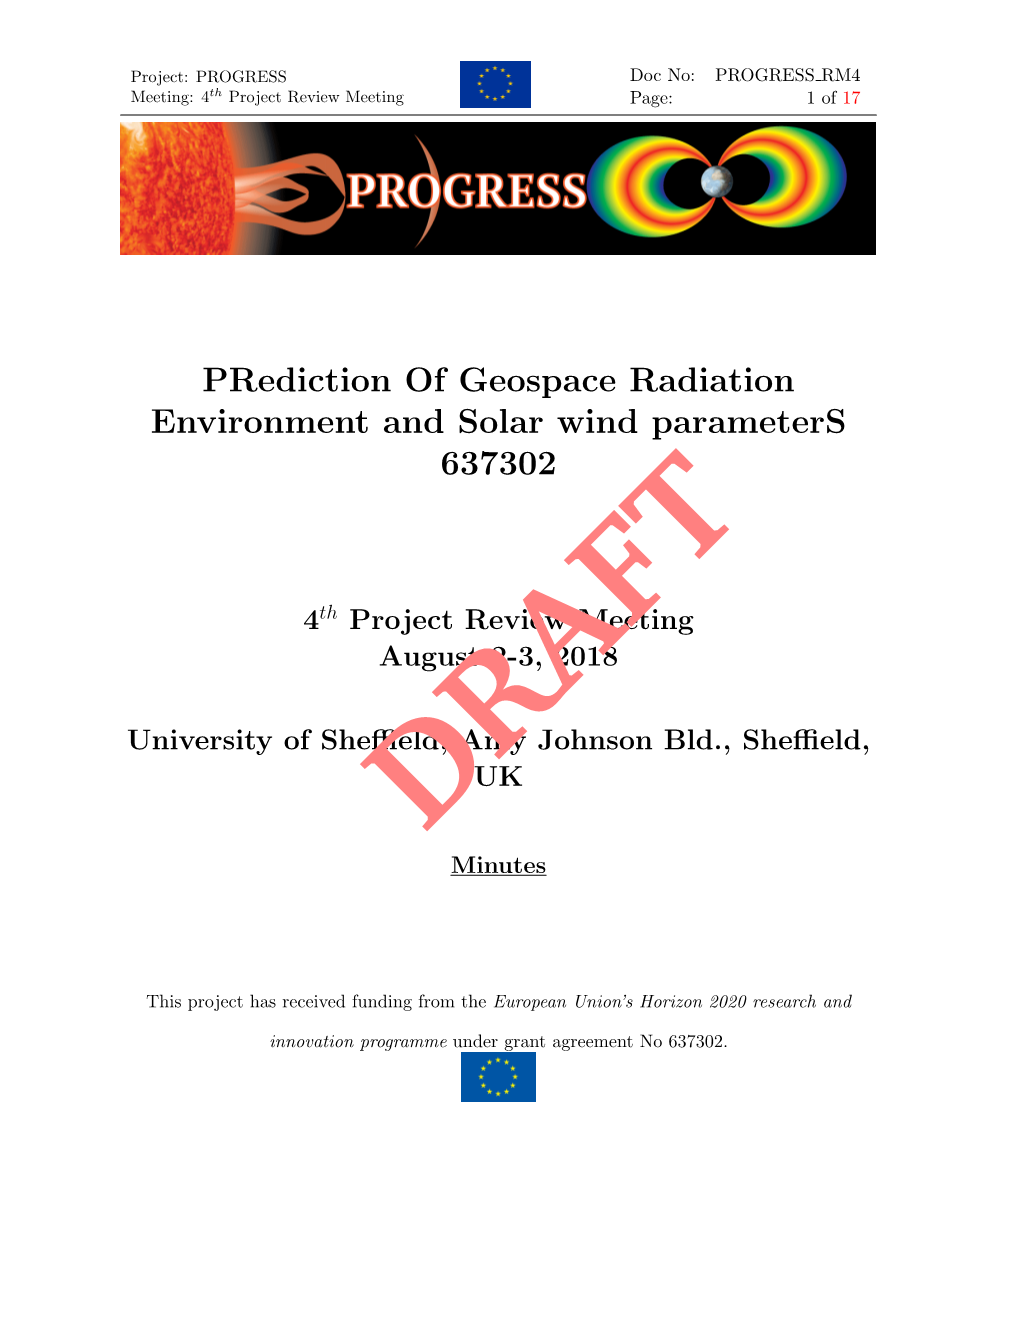 Prediction of Geospace Radiation Environment and Solar Wind Parameters 637302